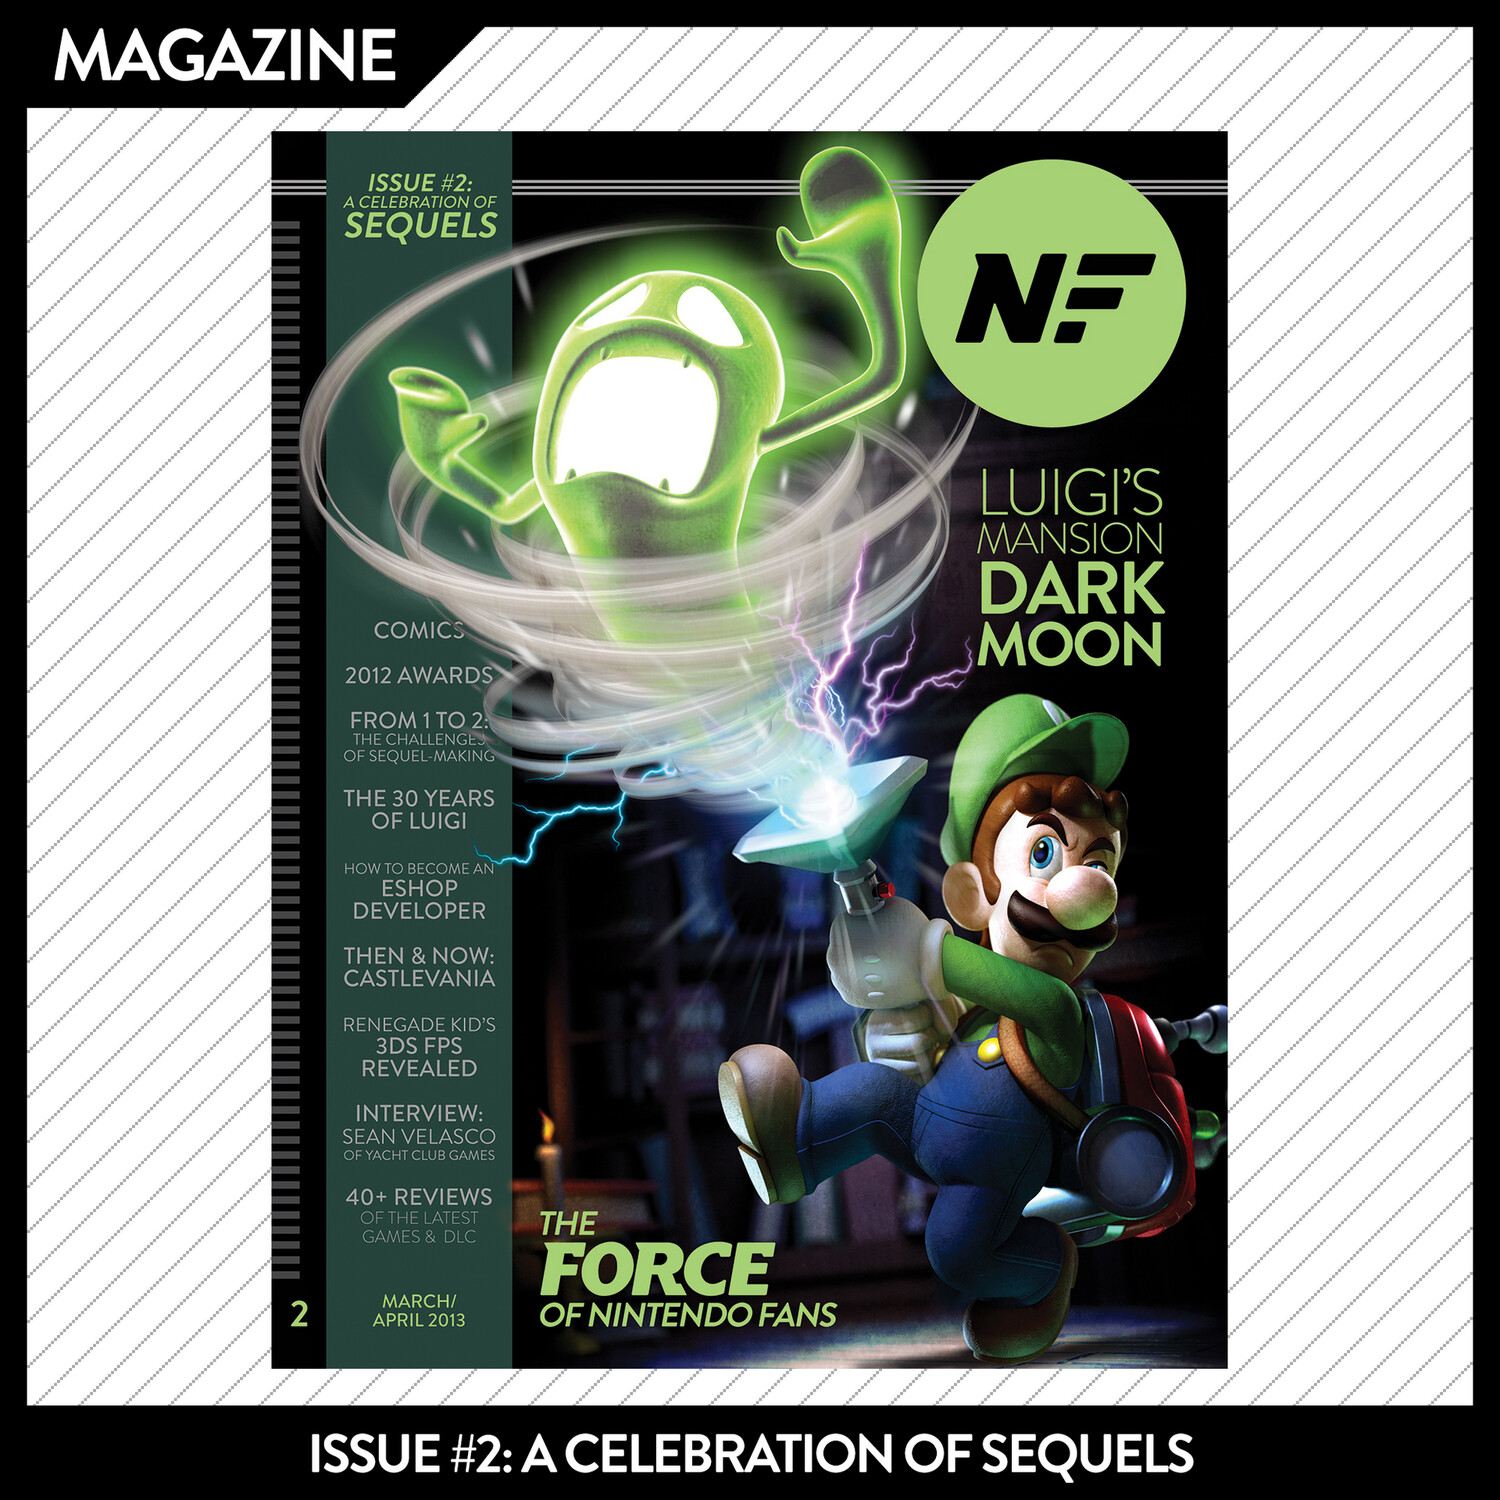 Issue #2: A Celebration of Sequels – March/April 2013